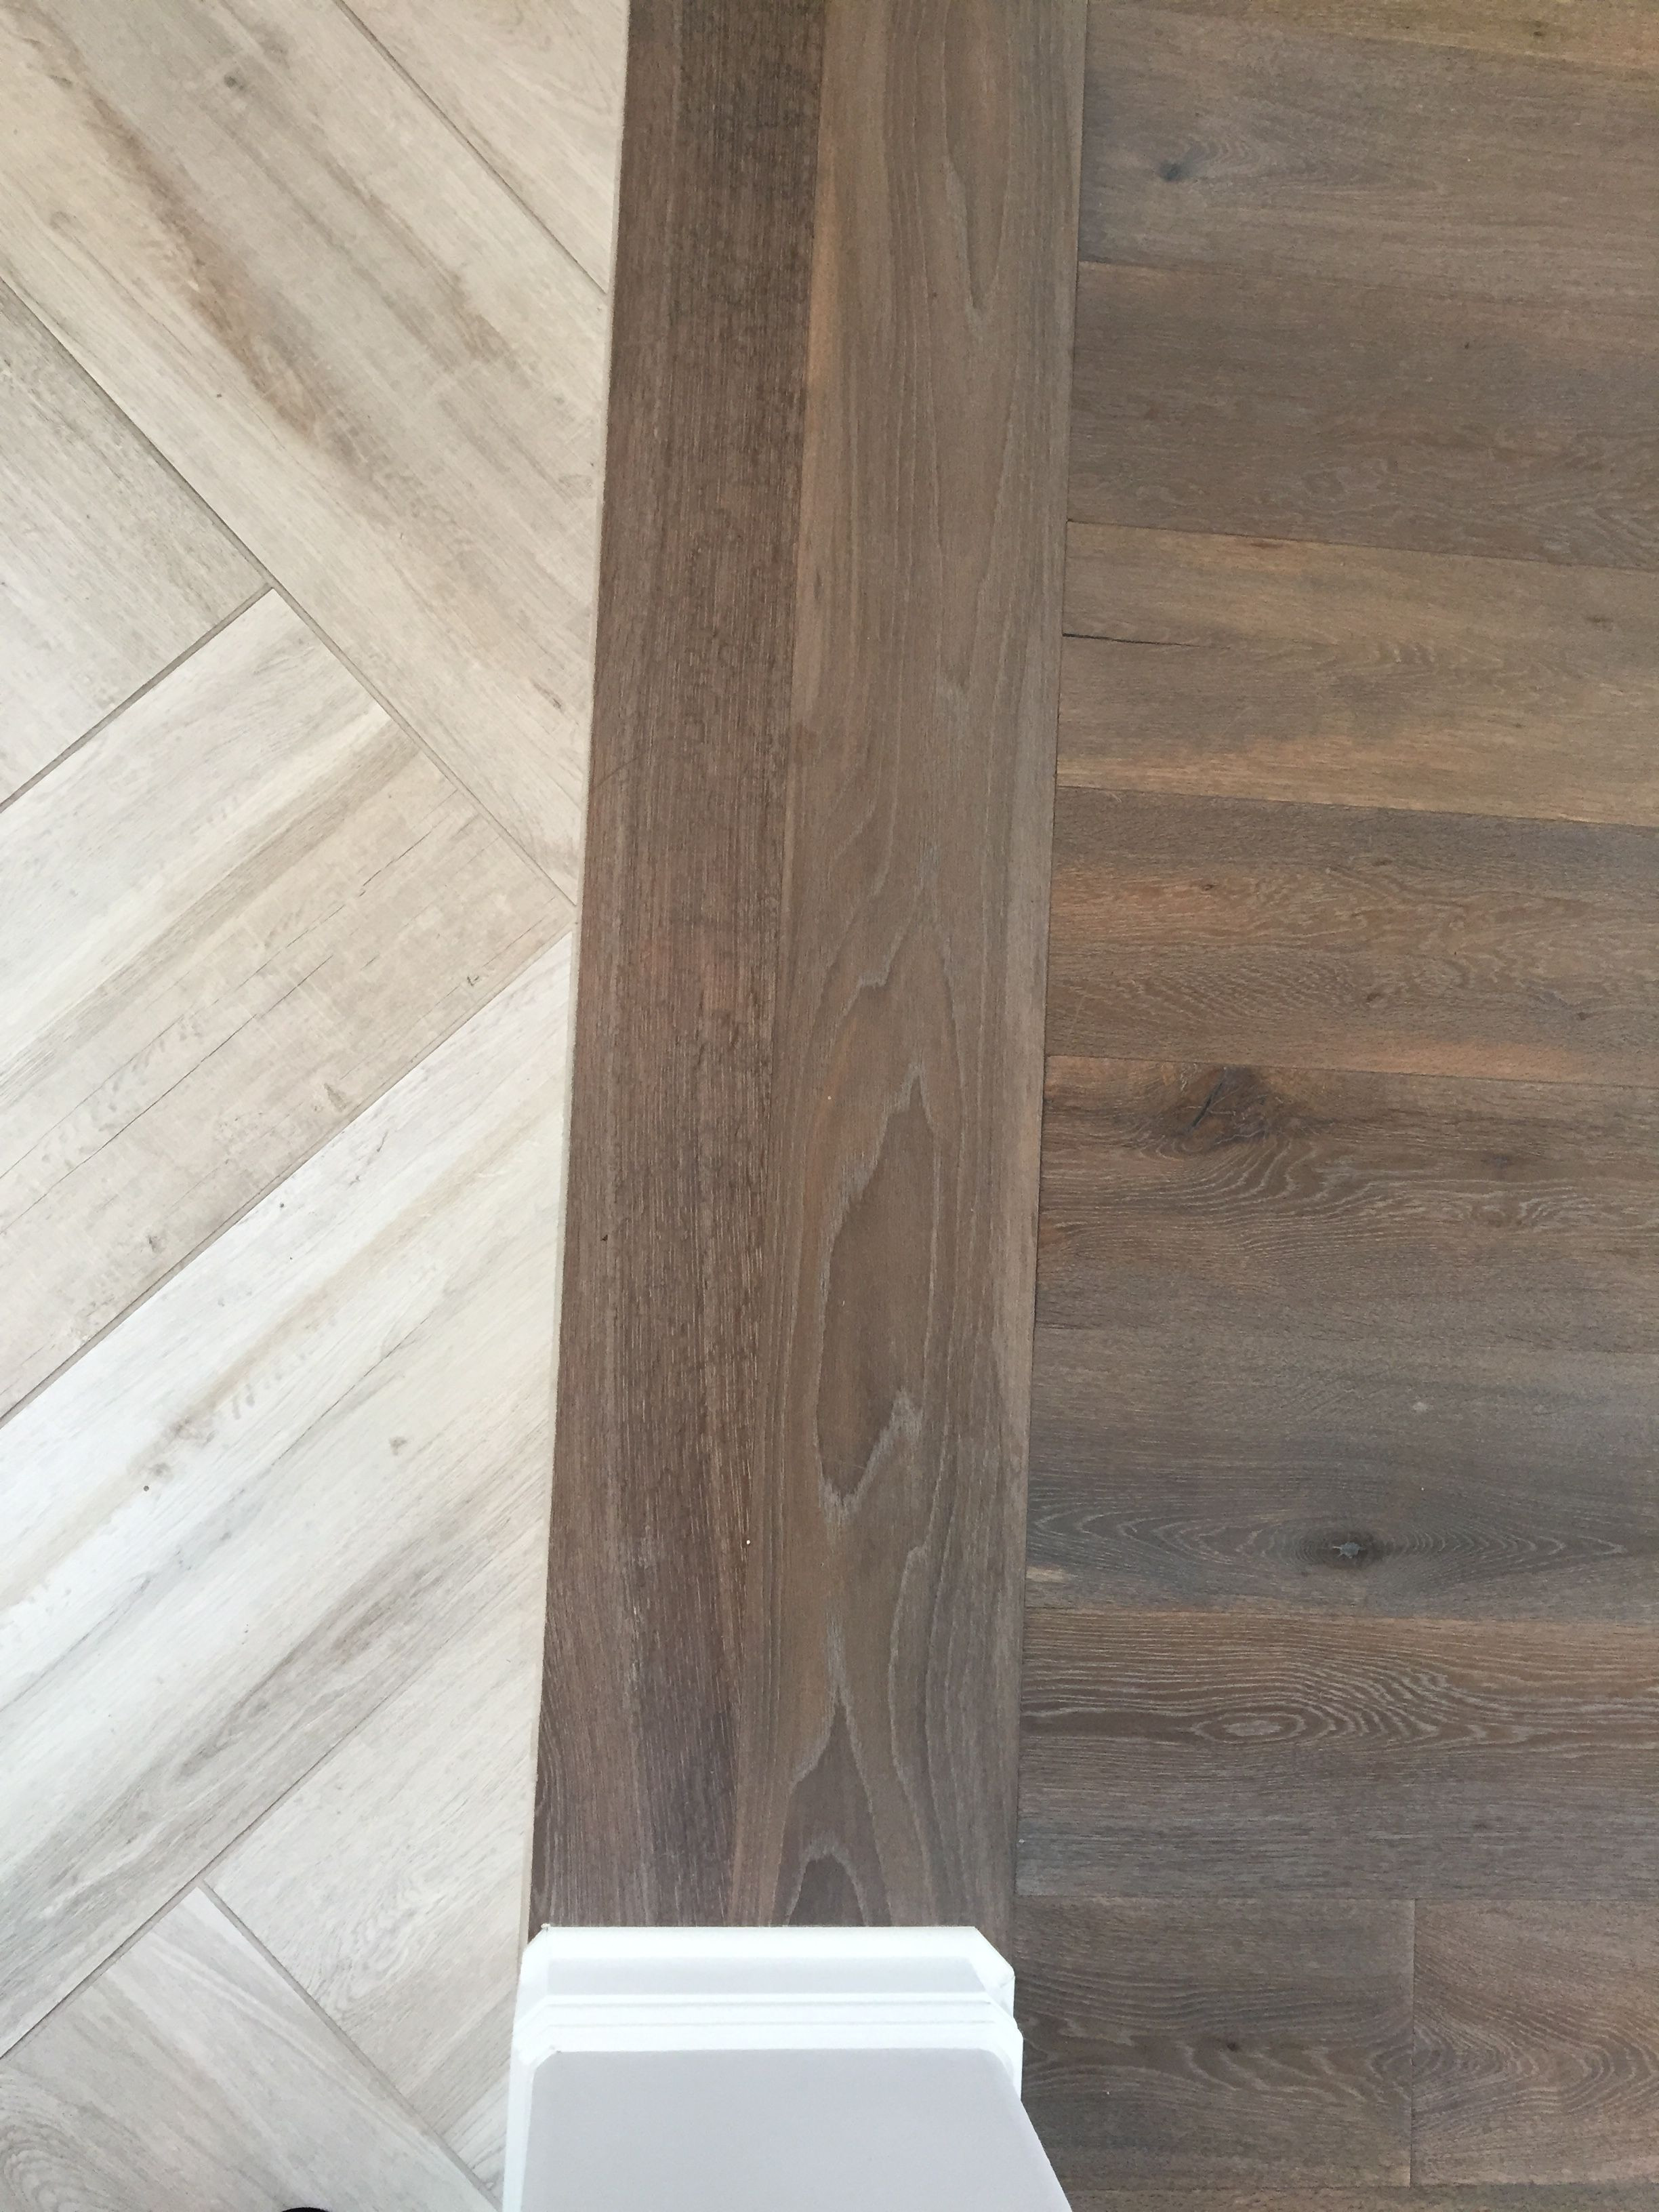 Pictures Of Hardwood Floors with Borders Of Floor Transition Laminate to Herringbone Tile Pattern Model Regarding Floor Transition Laminate to Herringbone Tile Pattern Herringbone Tile Pattern Herringbone Wood Floor